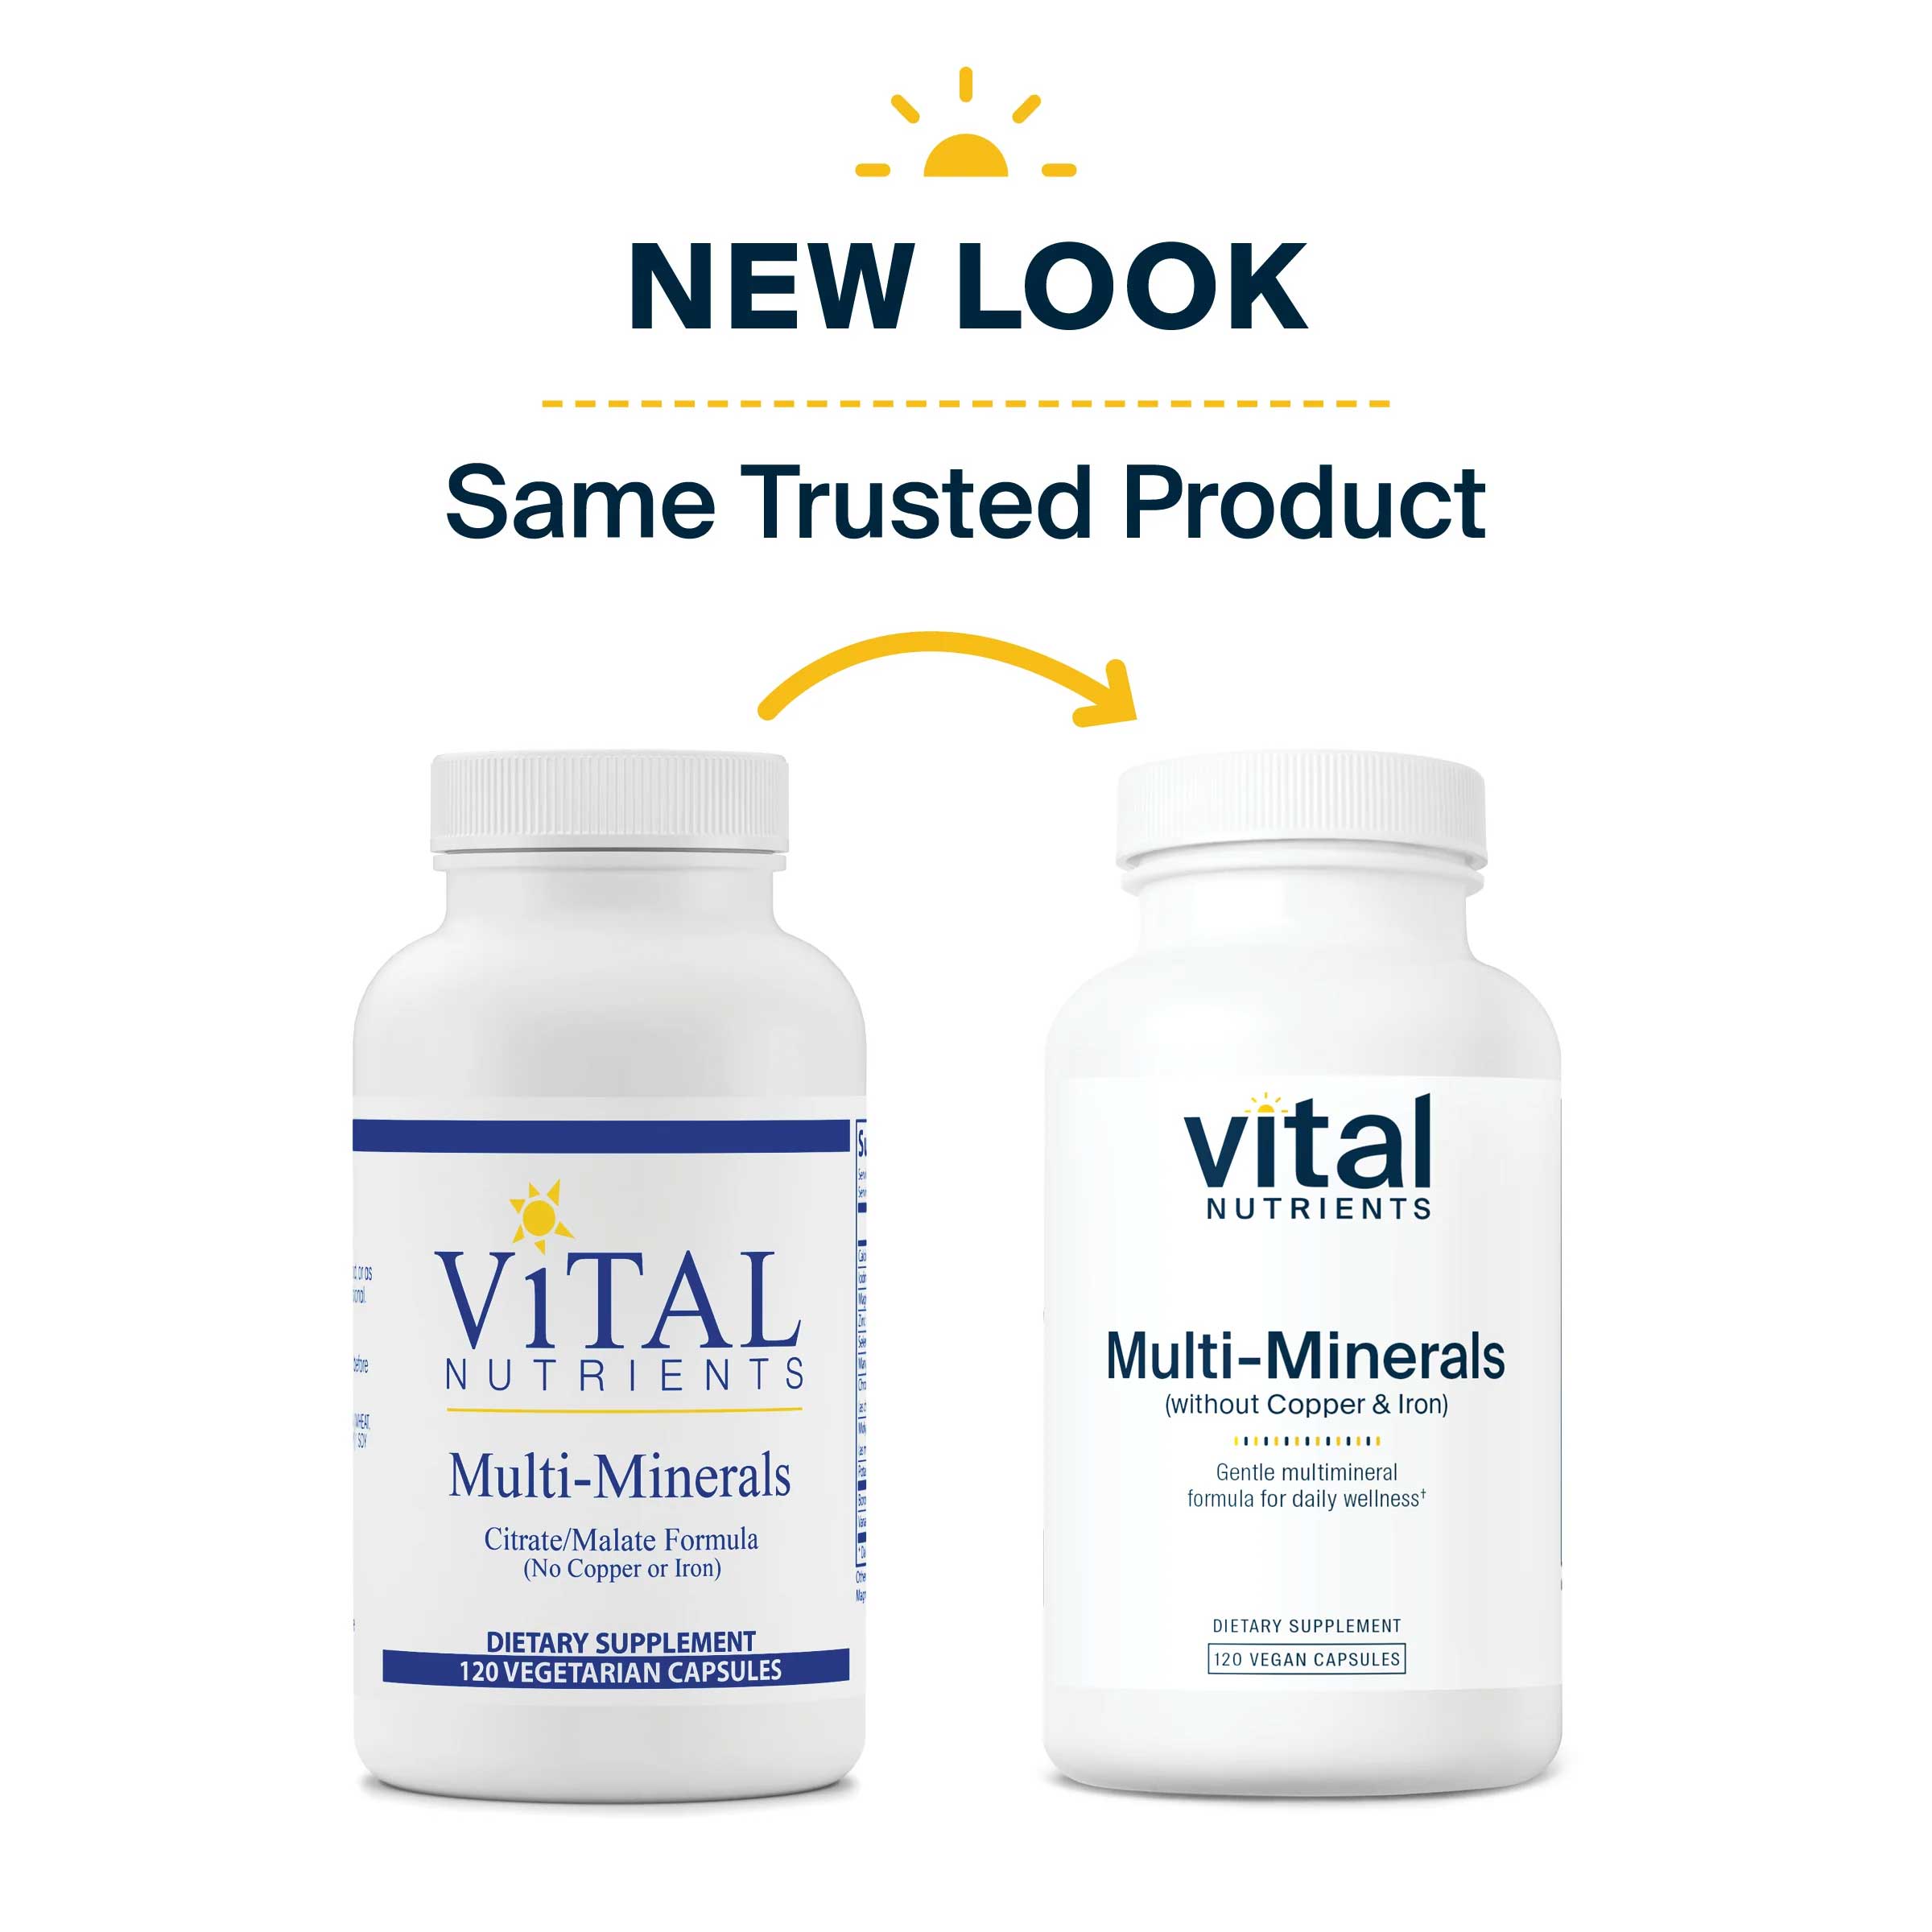 Vital Nutrients Multi-Minerals Citrate/Malate Formula (No Copper or Iron) New Look